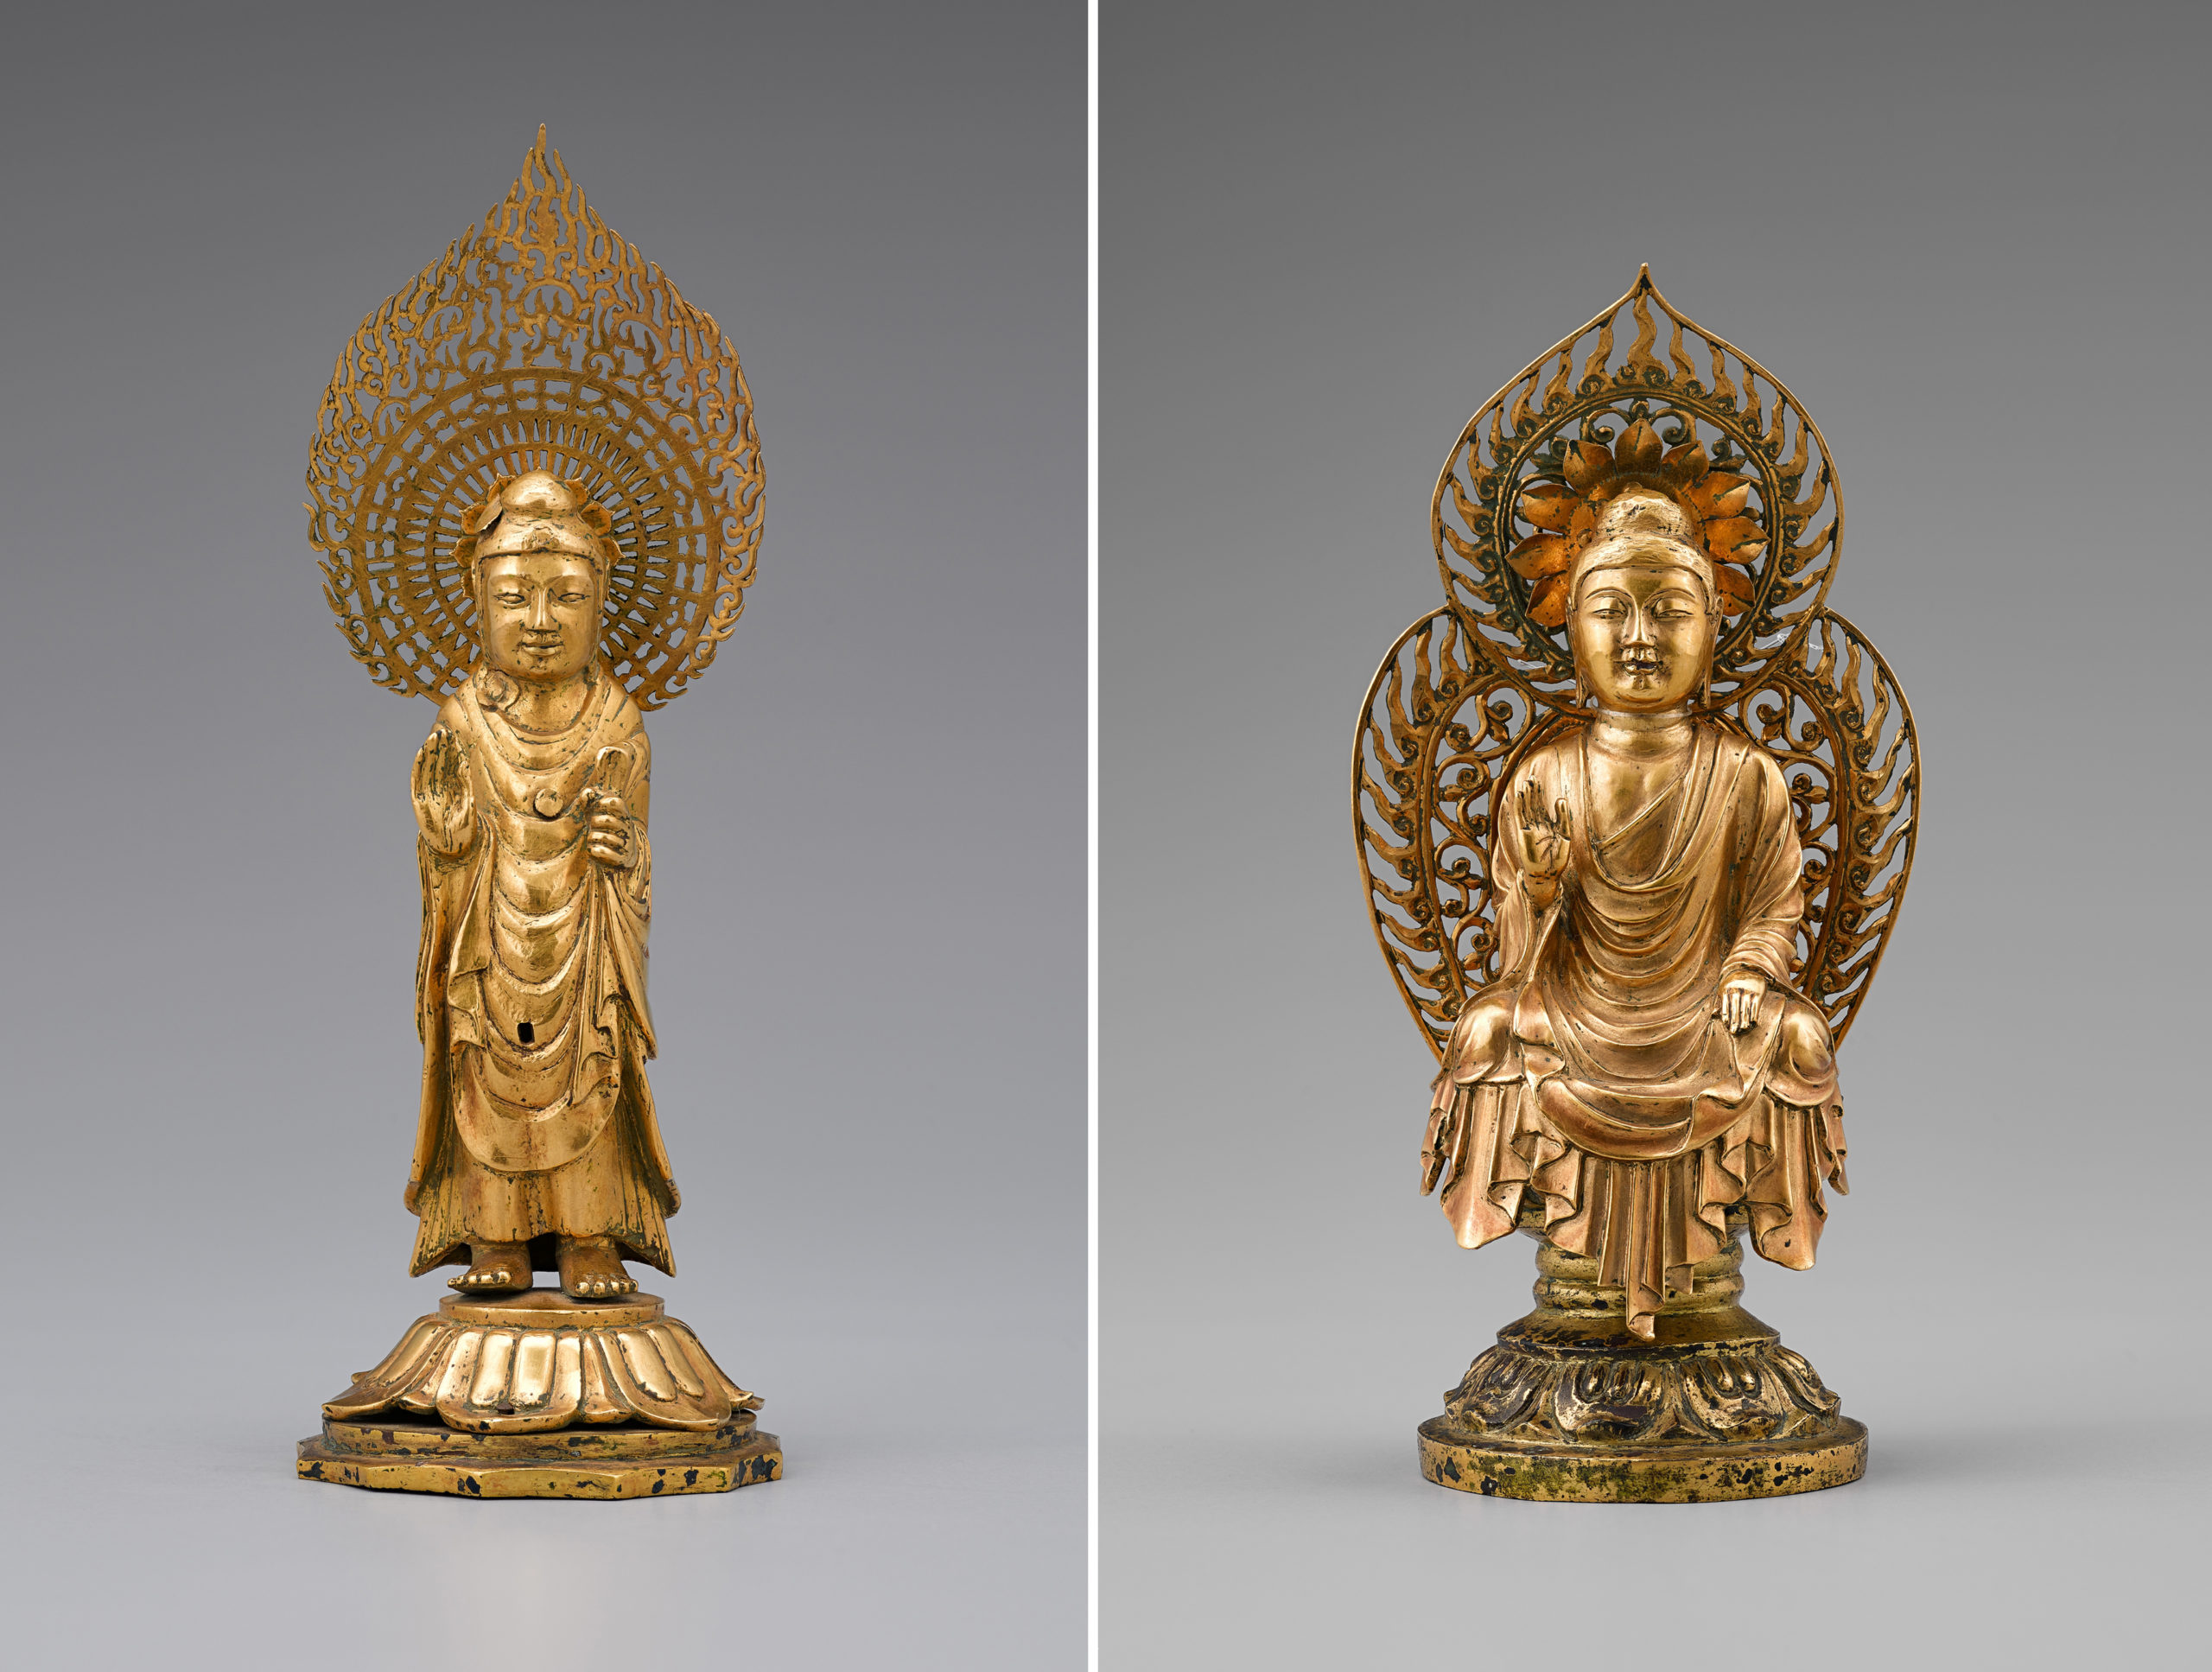 Gold Buddha statues from the stone pagoda on the site of Hwangboksa Temple